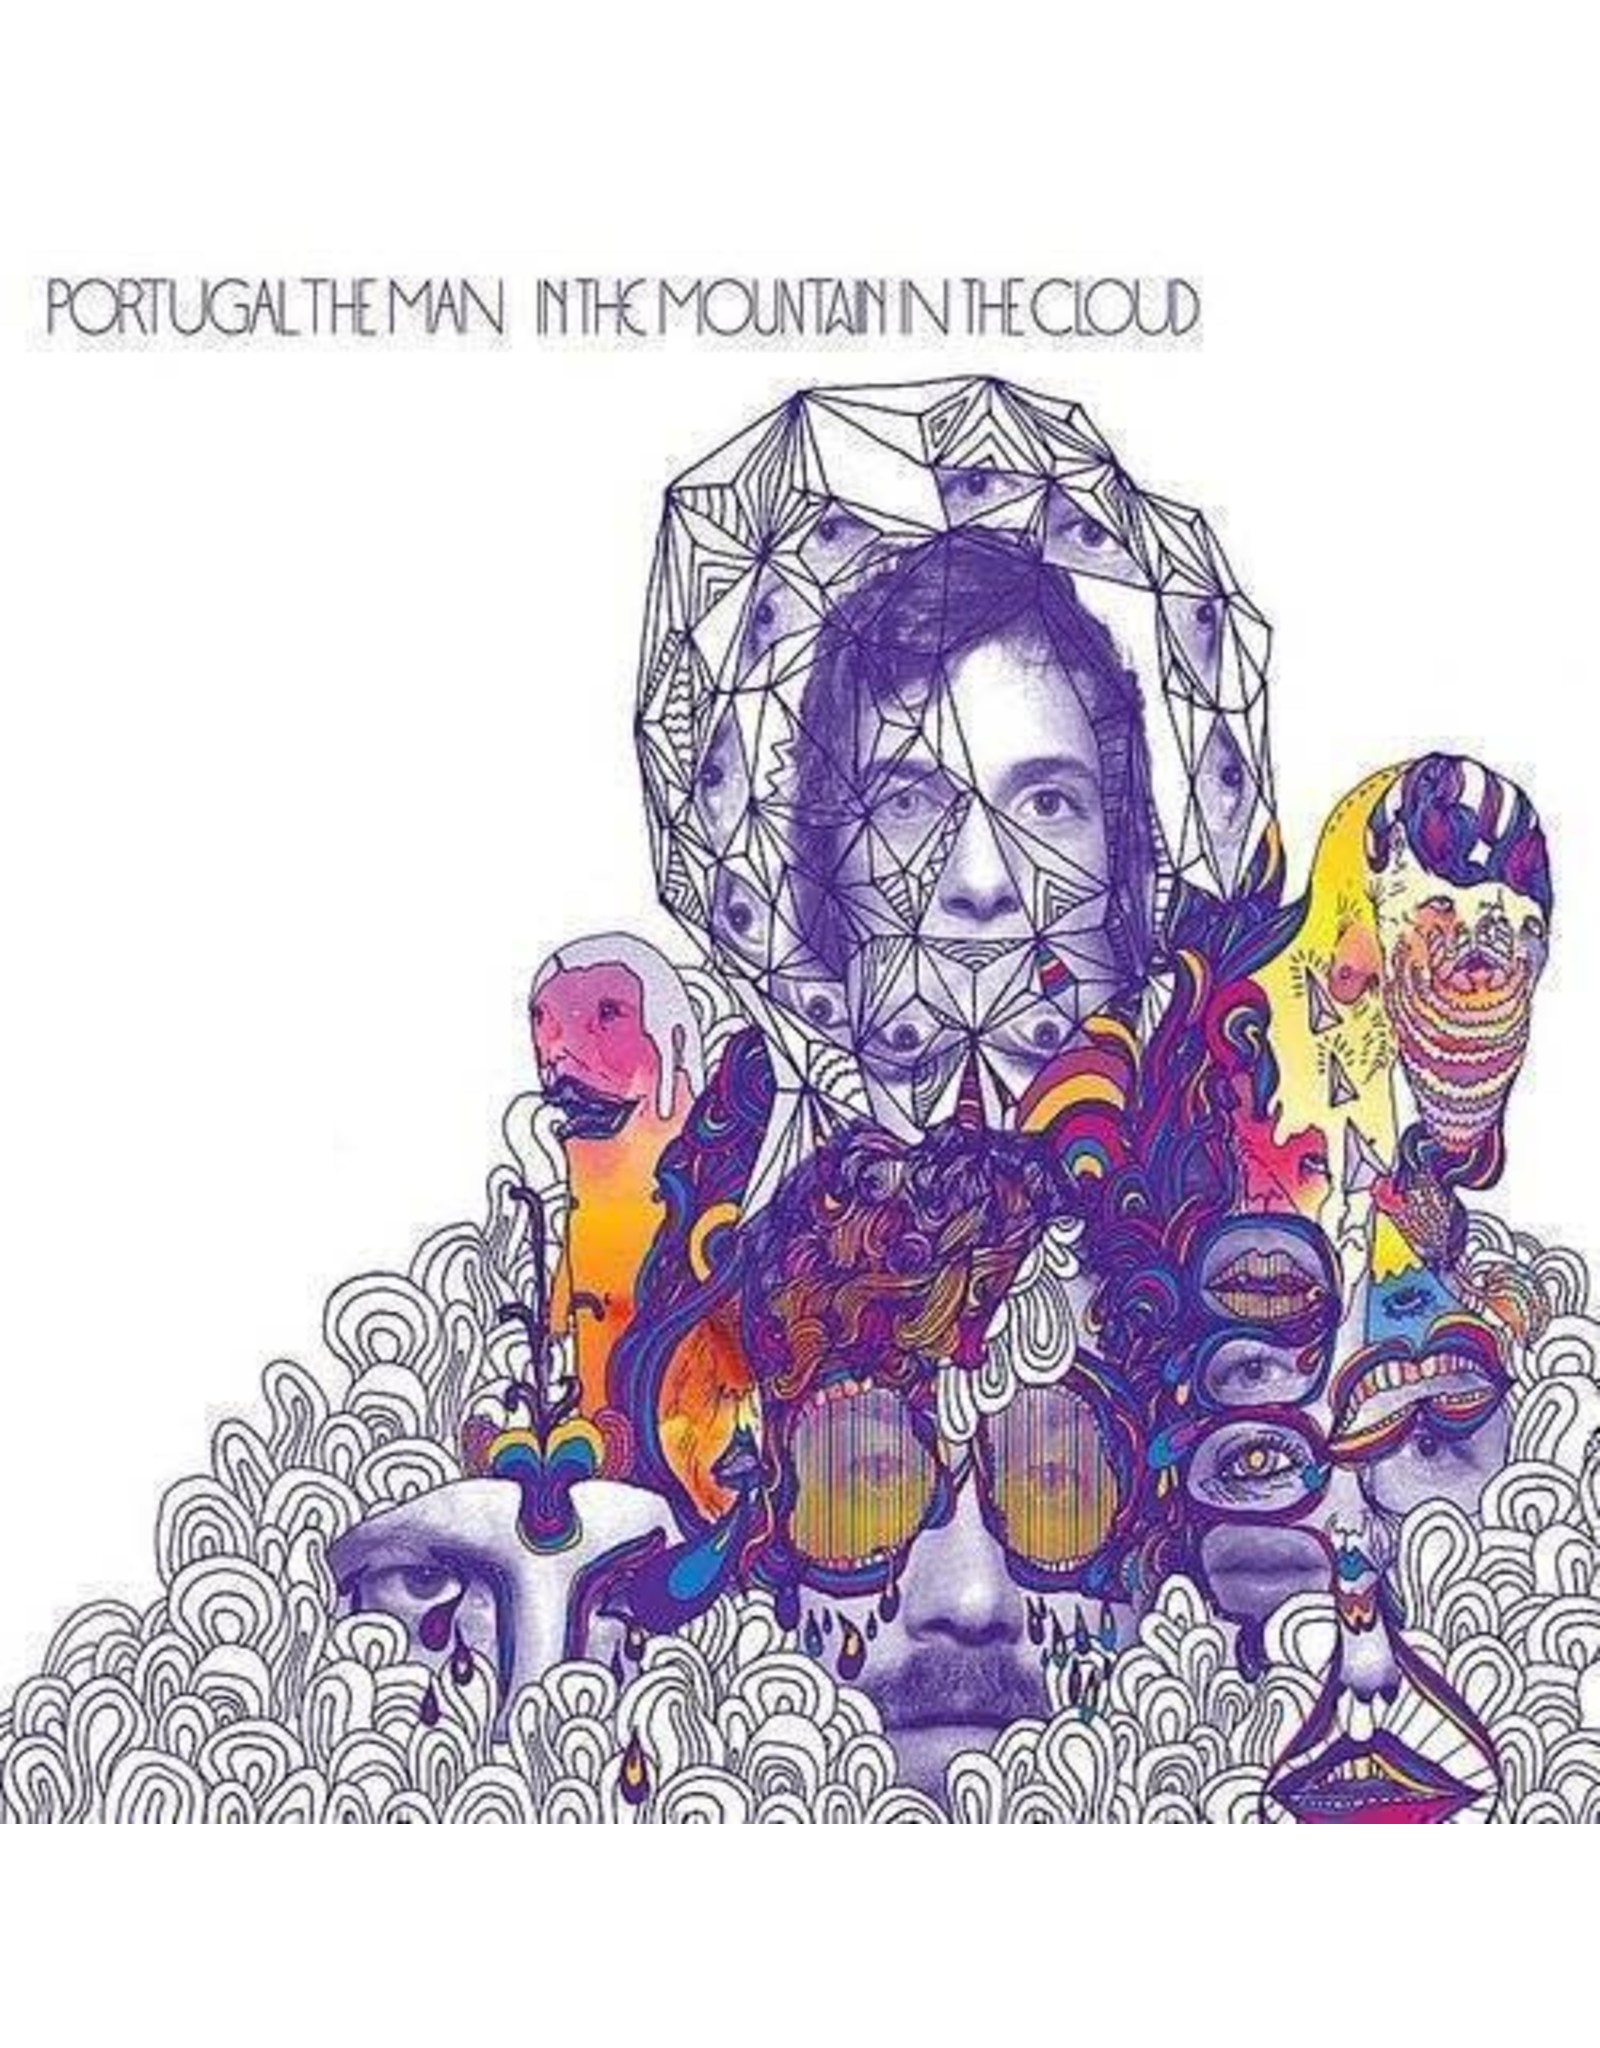 Portugal The Man - In The Mountain In The Cloud LP